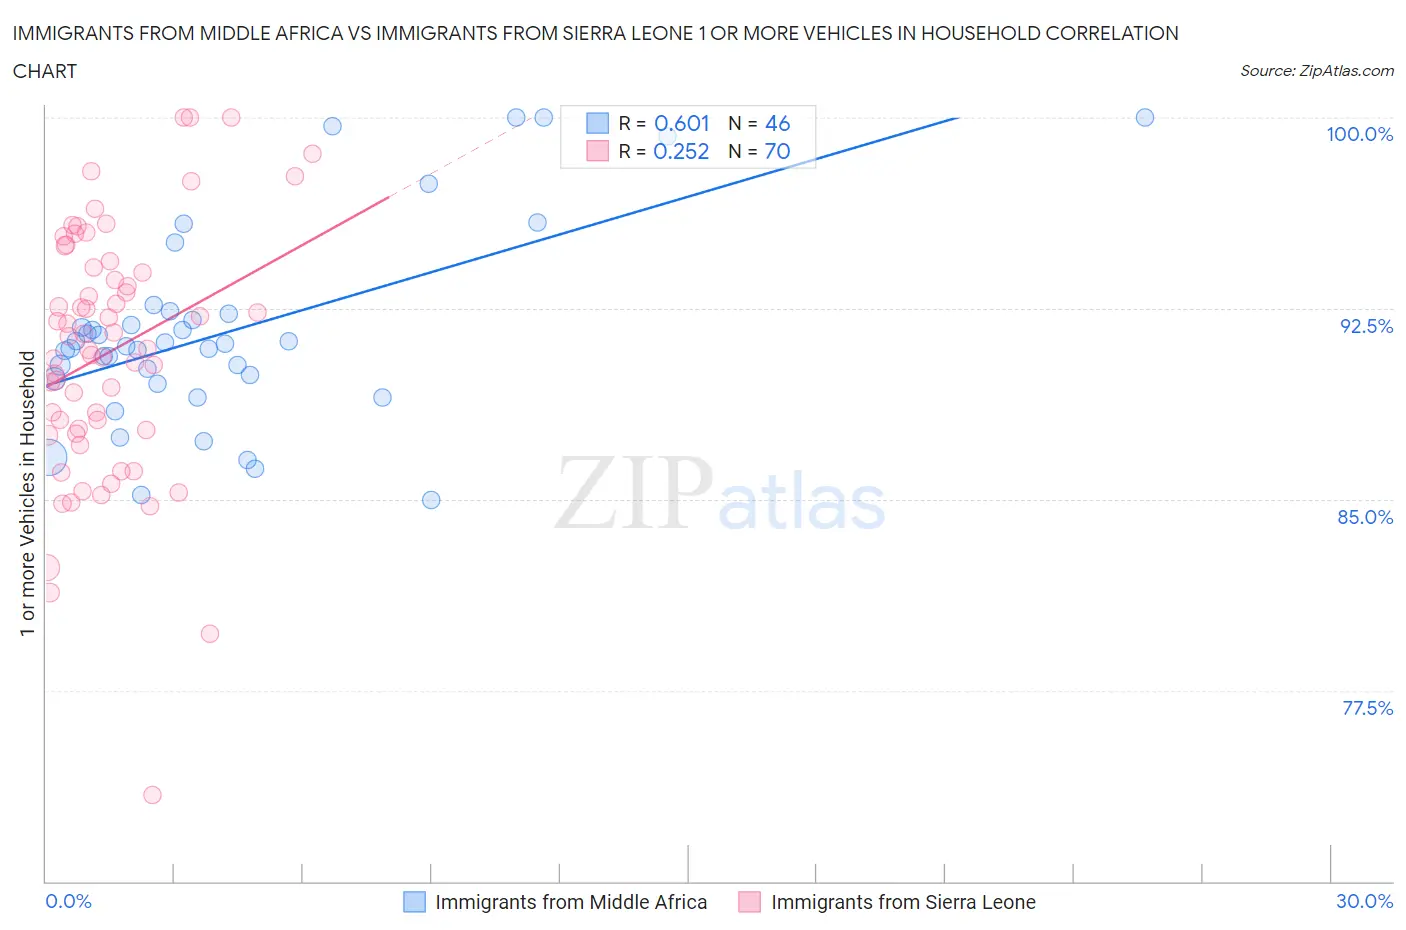 Immigrants from Middle Africa vs Immigrants from Sierra Leone 1 or more Vehicles in Household